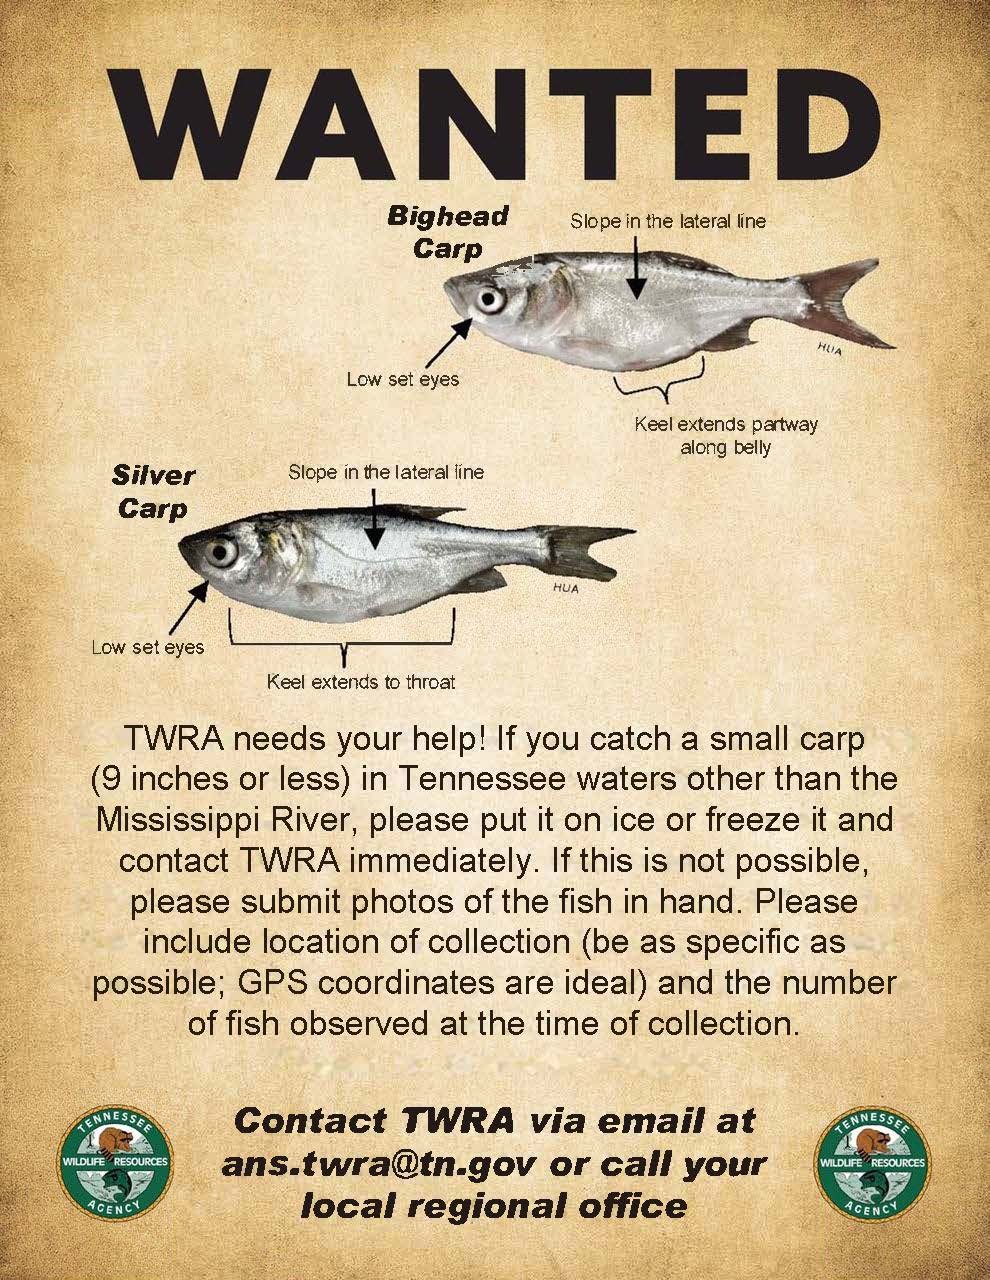 Invasive Carp in Tennessee, Information and Images